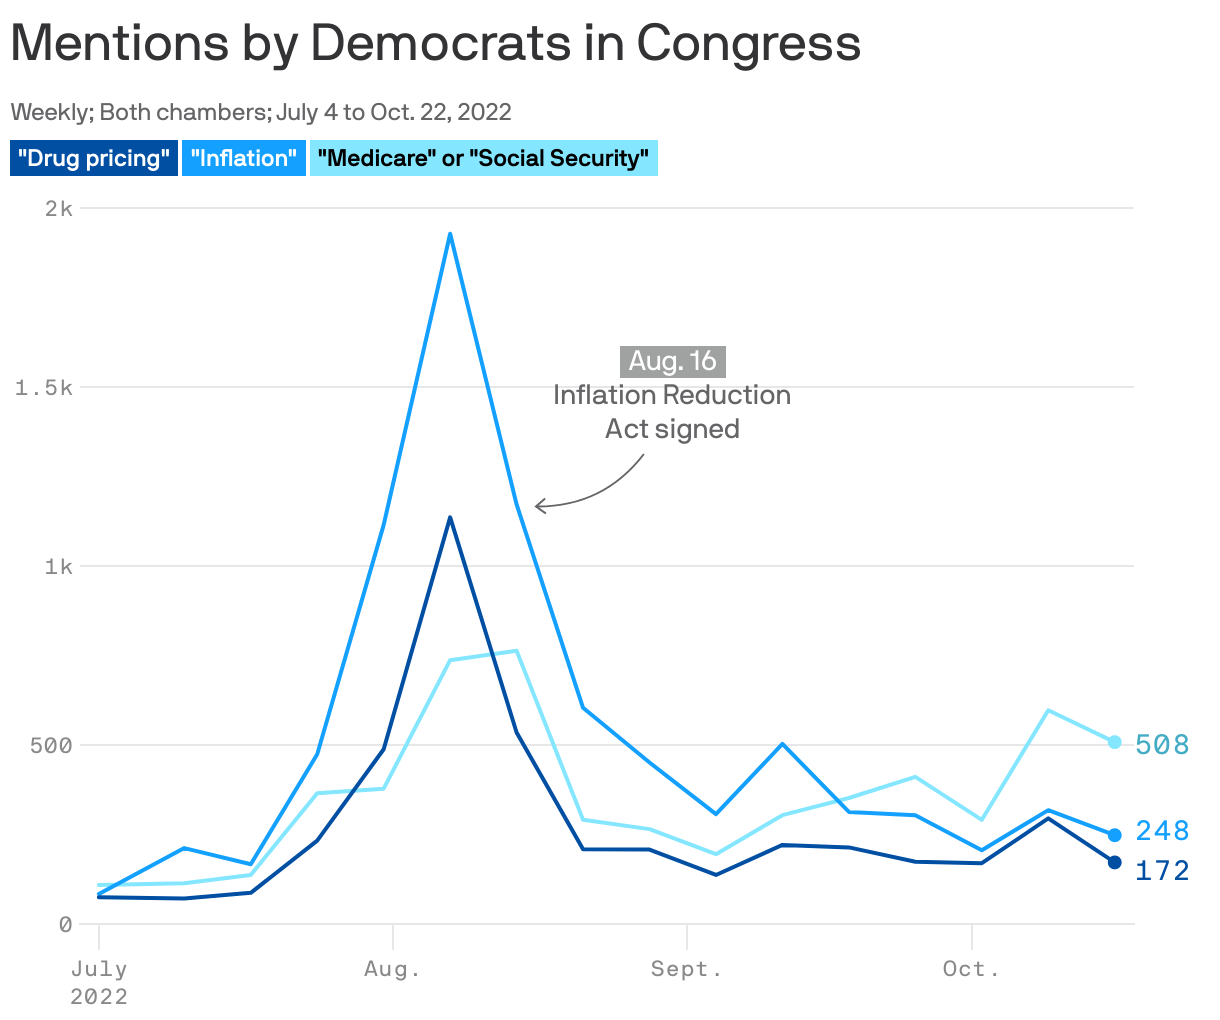 Mentions by Democrats in Congress